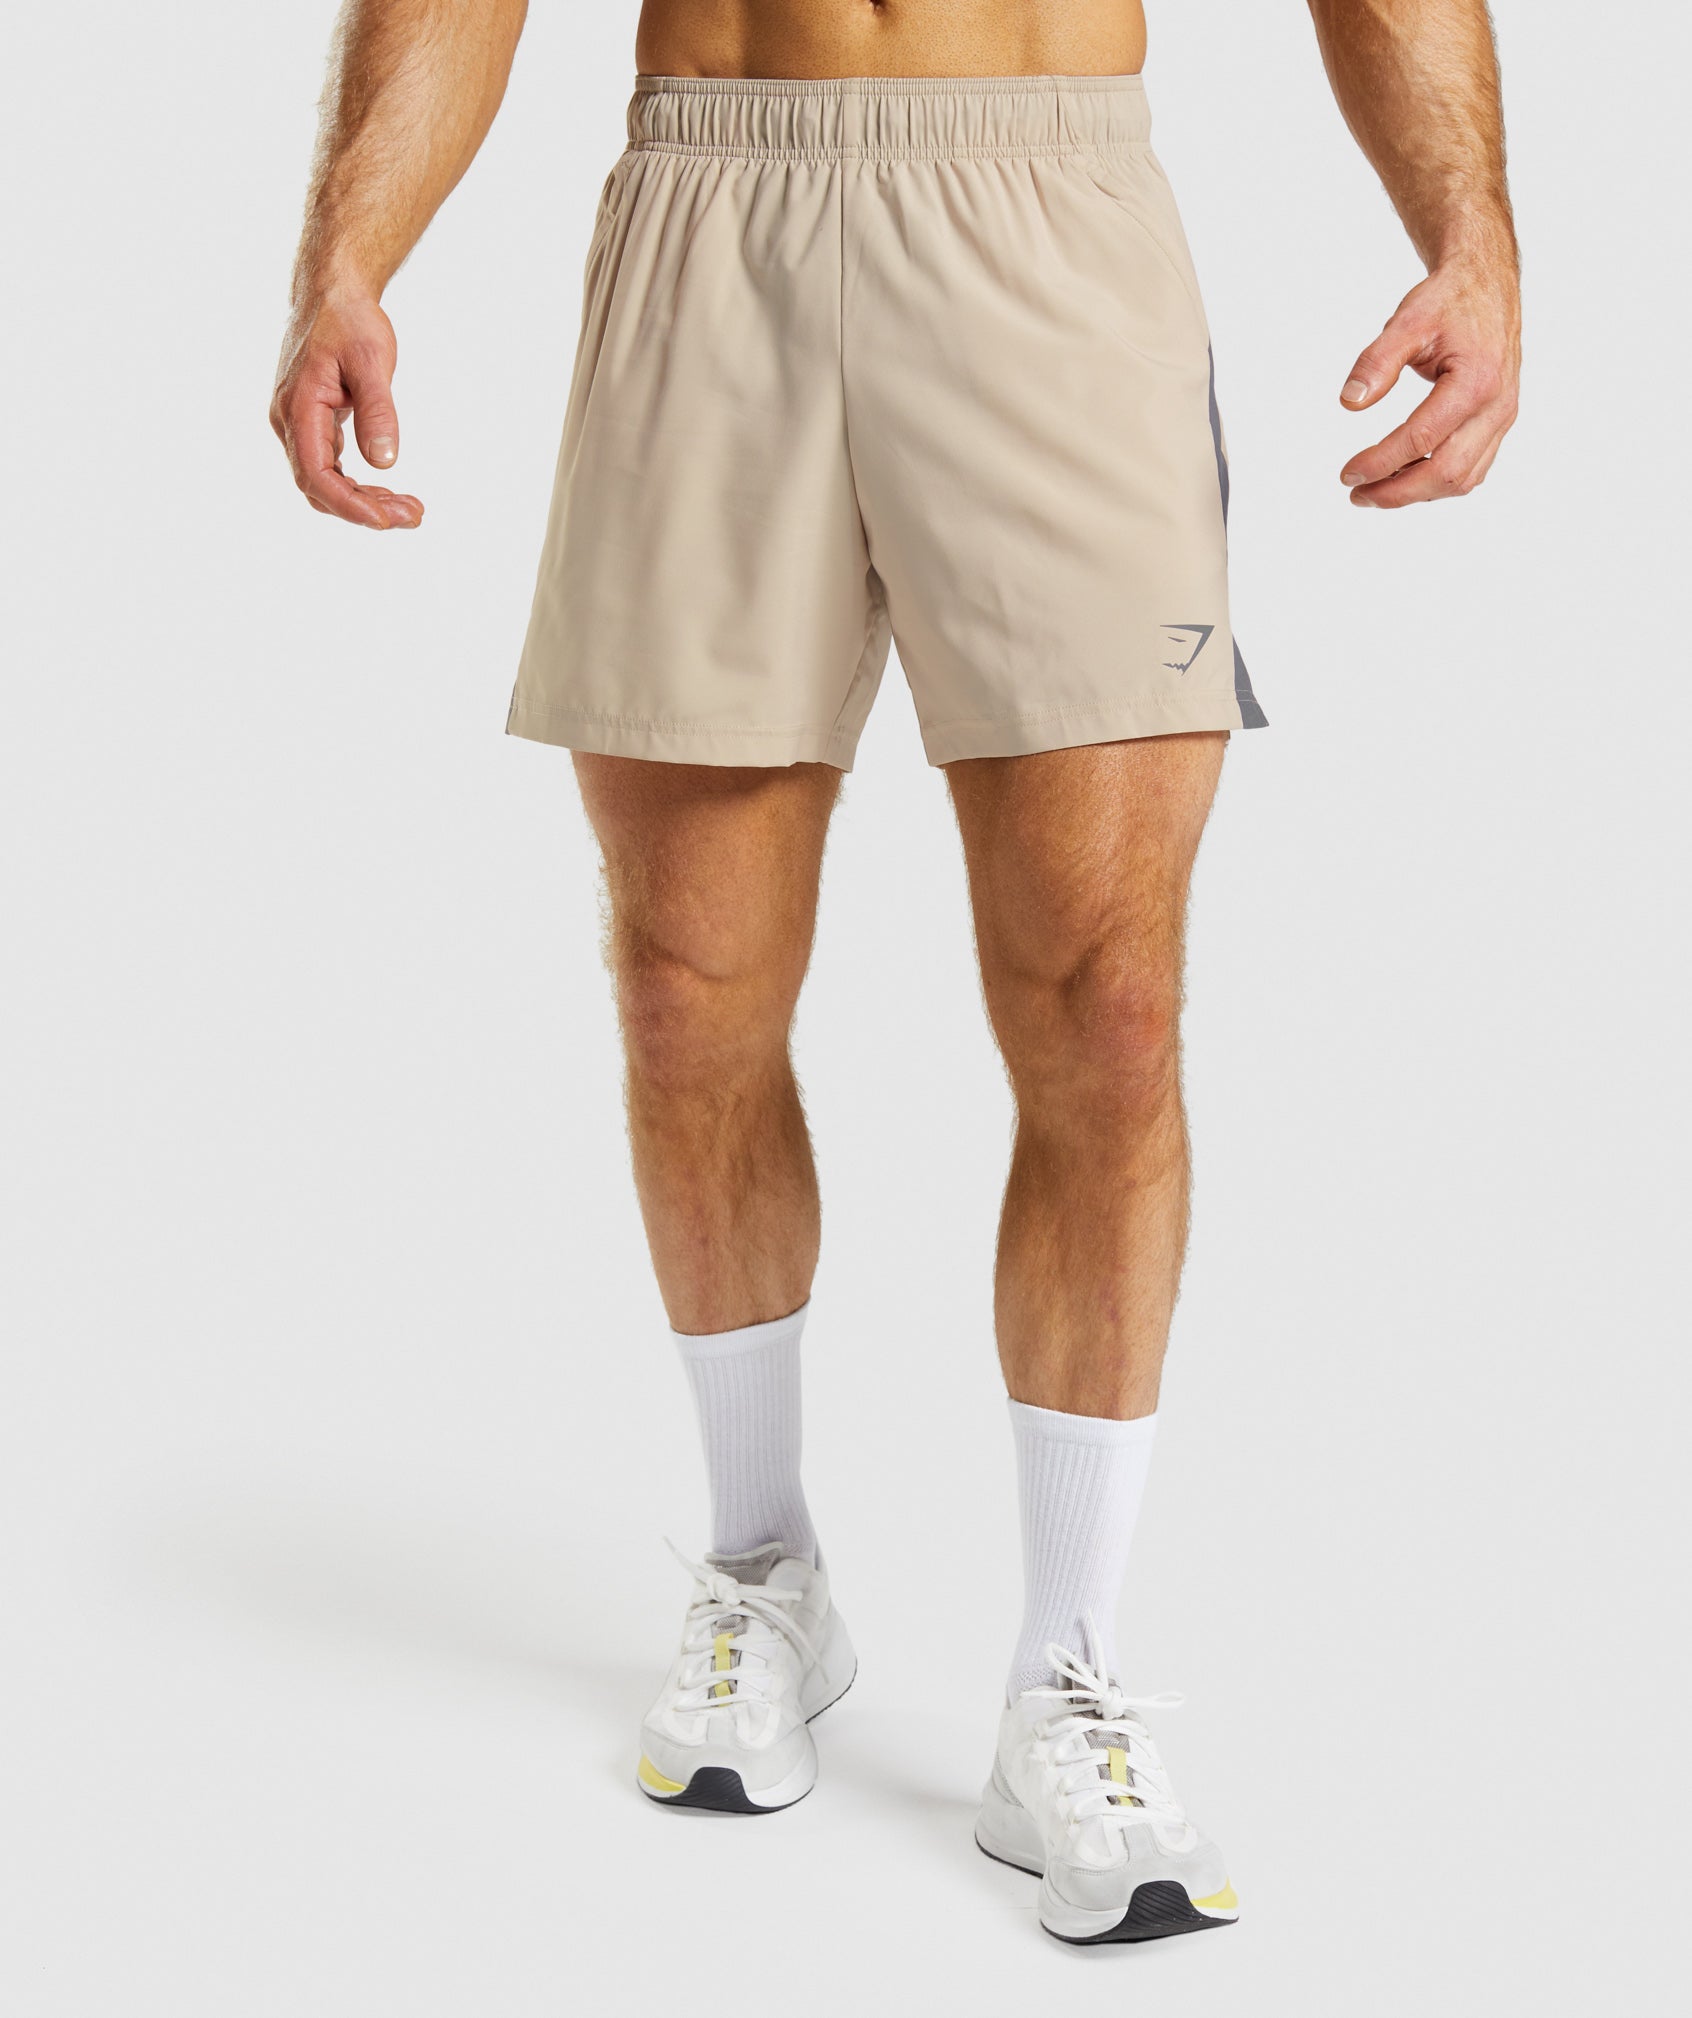 Sport Shorts in Toasted Brown/Silhouette Grey